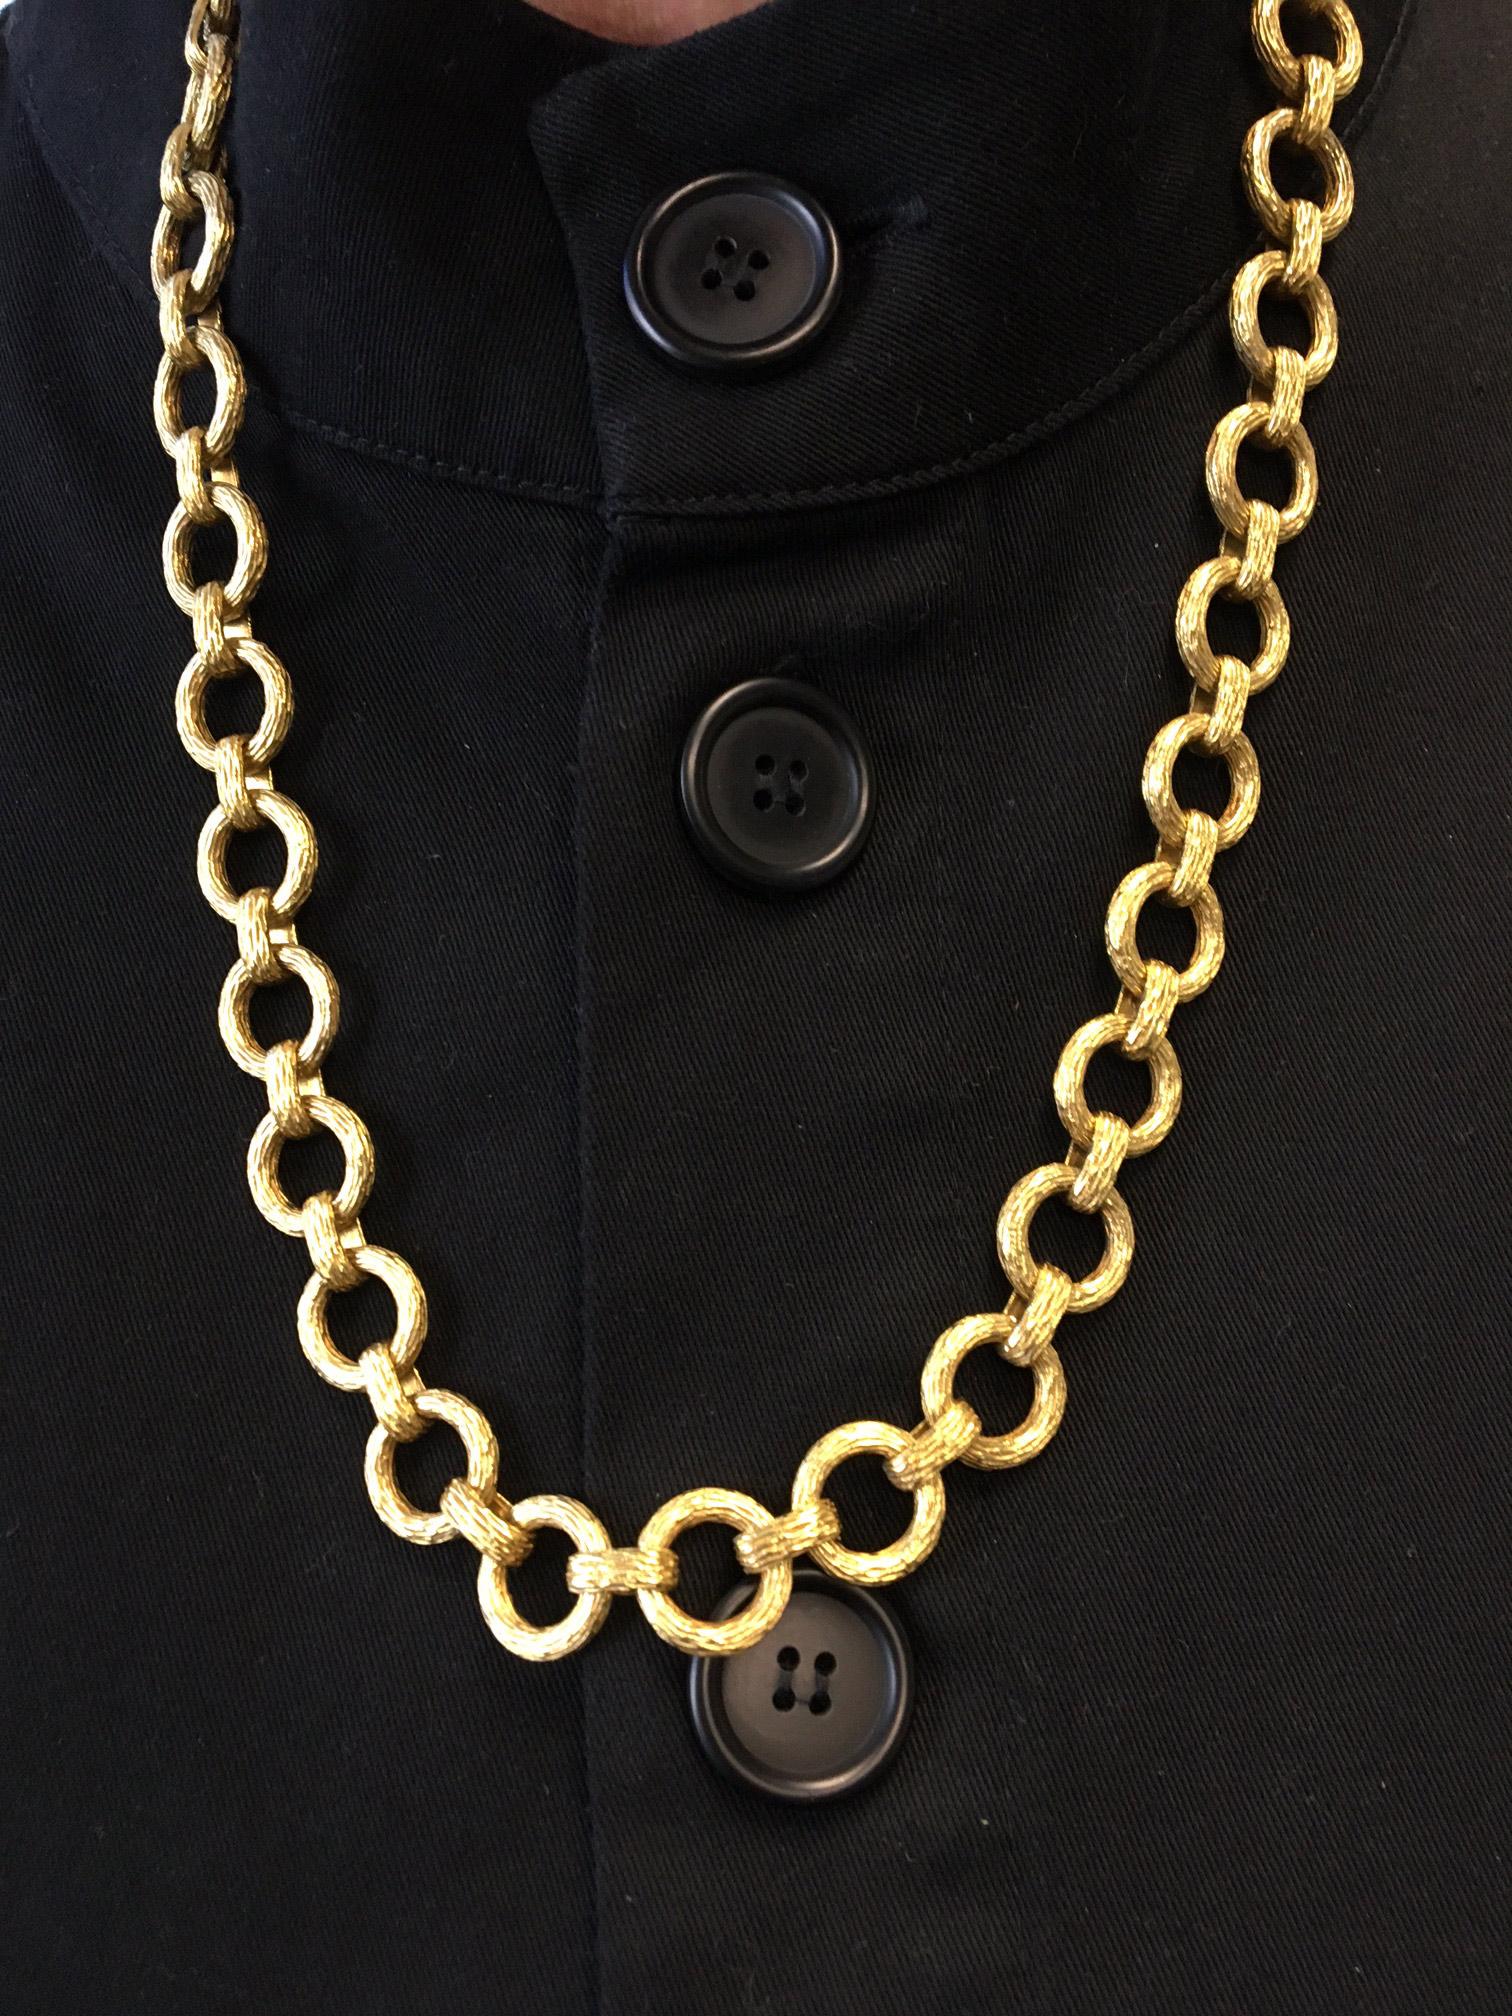 1980s gold chains